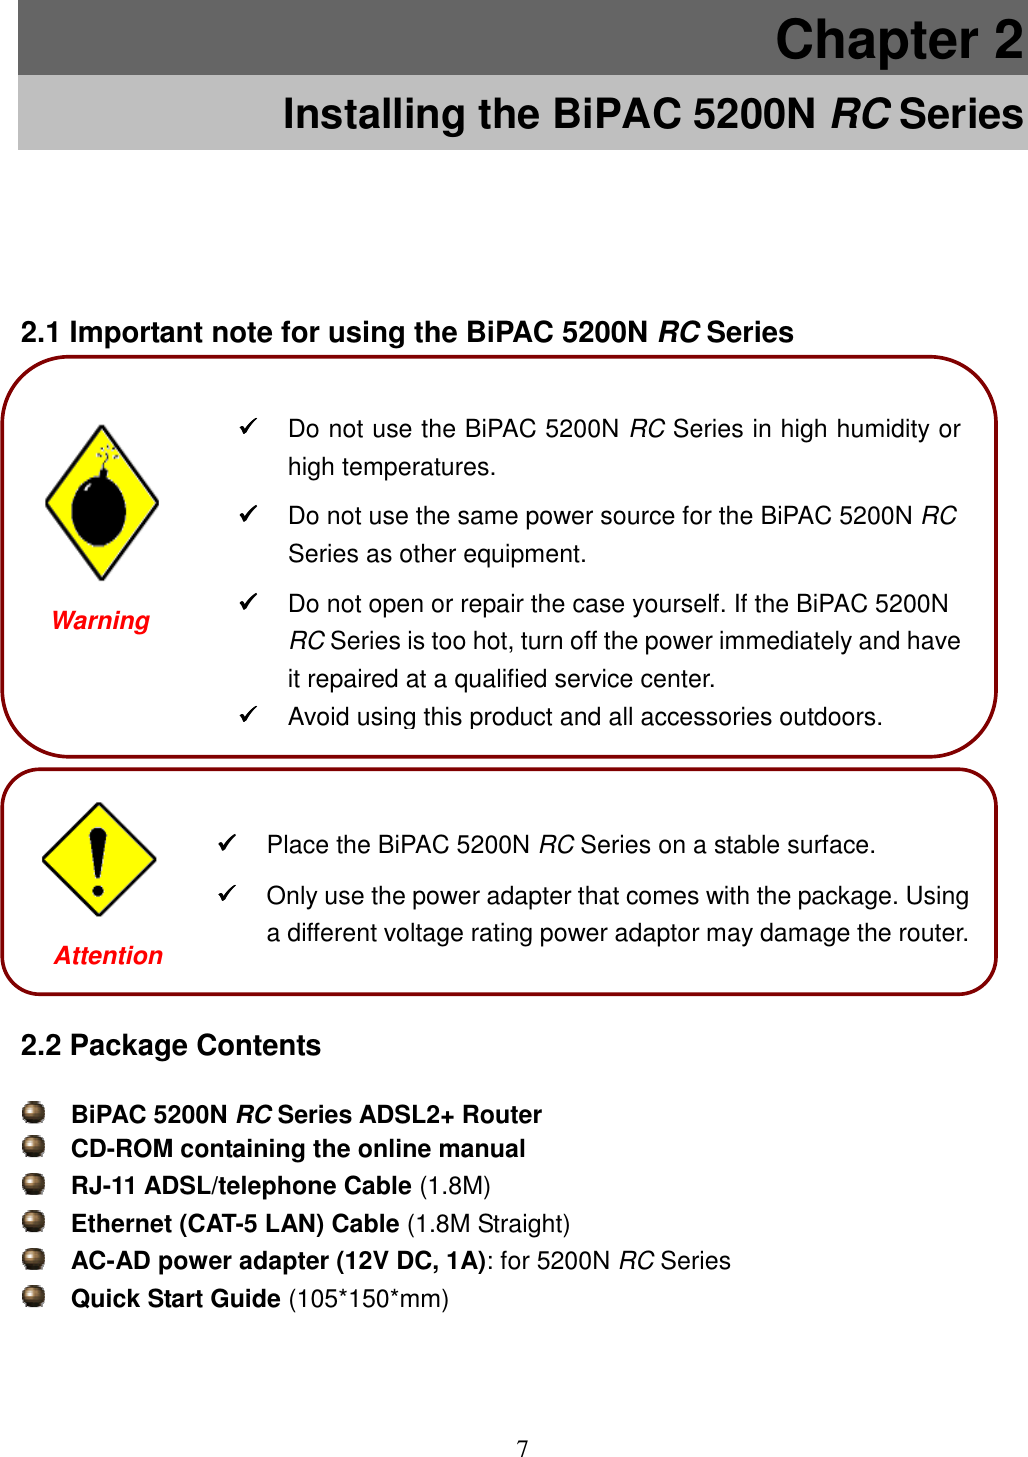 7  Chapter 2 Installing the BiPAC 5200N RC Series 2.1 Important note for using the BiPAC 5200N RC Series                 2.2 Package Contents  BiPAC 5200N RC Series ADSL2+ Router   CD-ROM containing the online manual  RJ-11 ADSL/telephone Cable (1.8M)  Ethernet (CAT-5 LAN) Cable (1.8M Straight)  AC-AD power adapter (12V DC, 1A): for 5200N RC Series  Quick Start Guide (105*150*mm)  Place the BiPAC 5200N RC Series on a stable surface.  Only use the power adapter that comes with the package. Using a different voltage rating power adaptor may damage the router.  Attention  Do not use the BiPAC 5200N RC Series in high humidity or high temperatures.  Do not use the same power source for the BiPAC 5200N RC Series as other equipment.  Do not open or repair the case yourself. If the BiPAC 5200N RC Series is too hot, turn off the power immediately and have it repaired at a qualified service center.  Avoid using this product and all accessories outdoors. Warning  